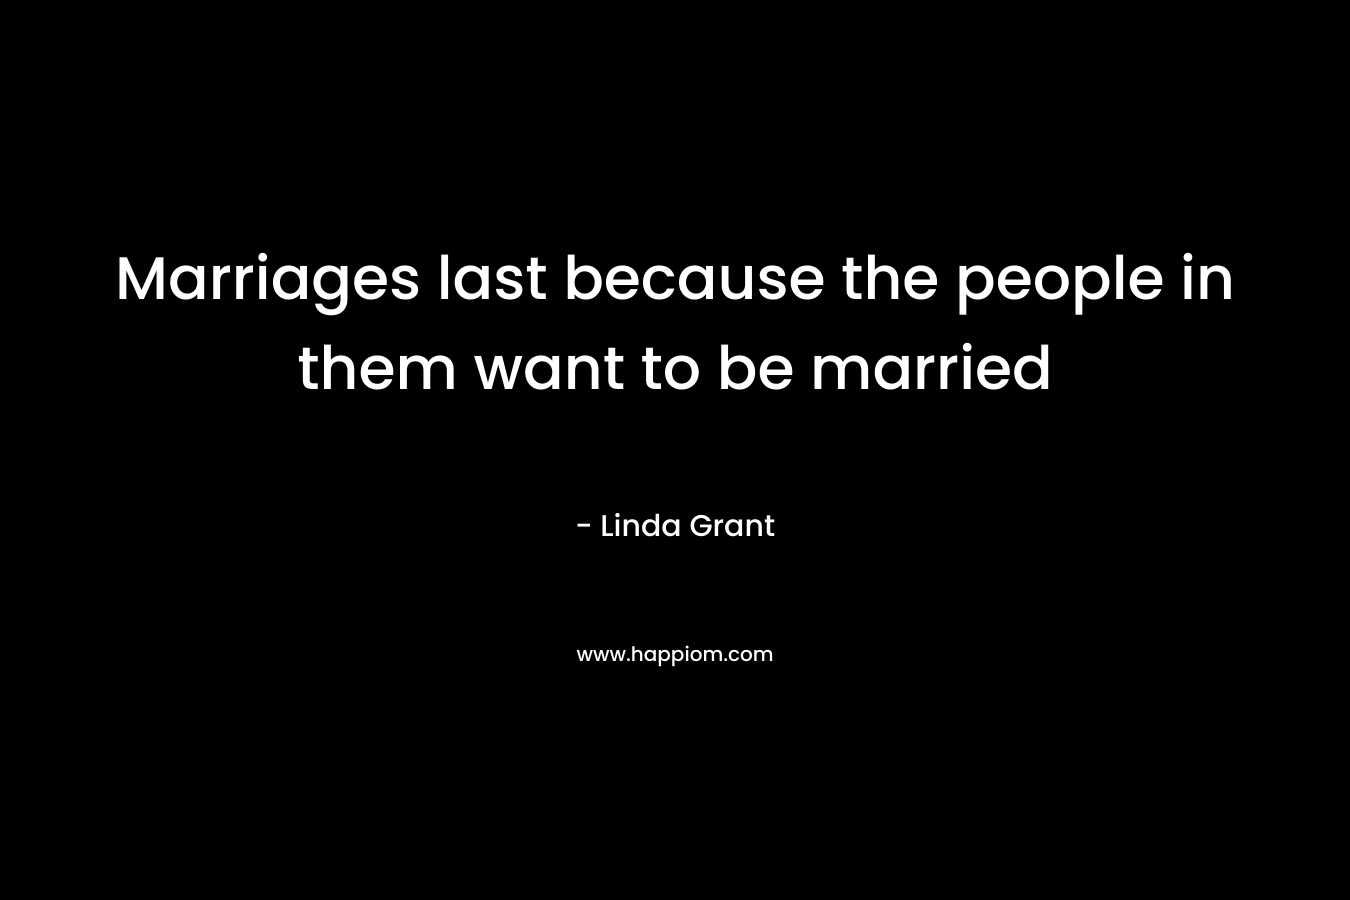 Marriages last because the people in them want to be married – Linda Grant